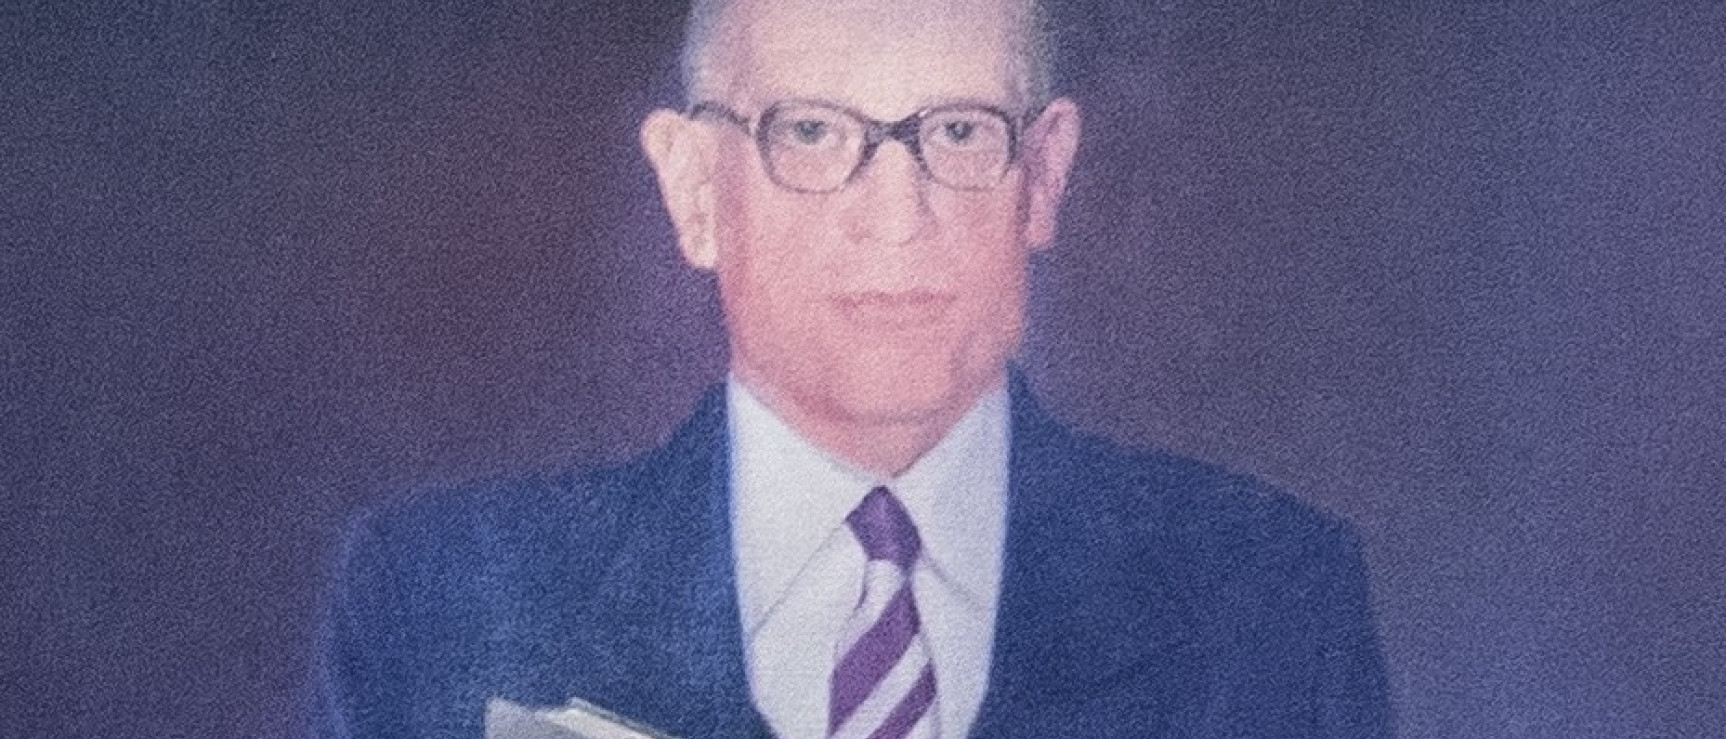 Luis Alfonso